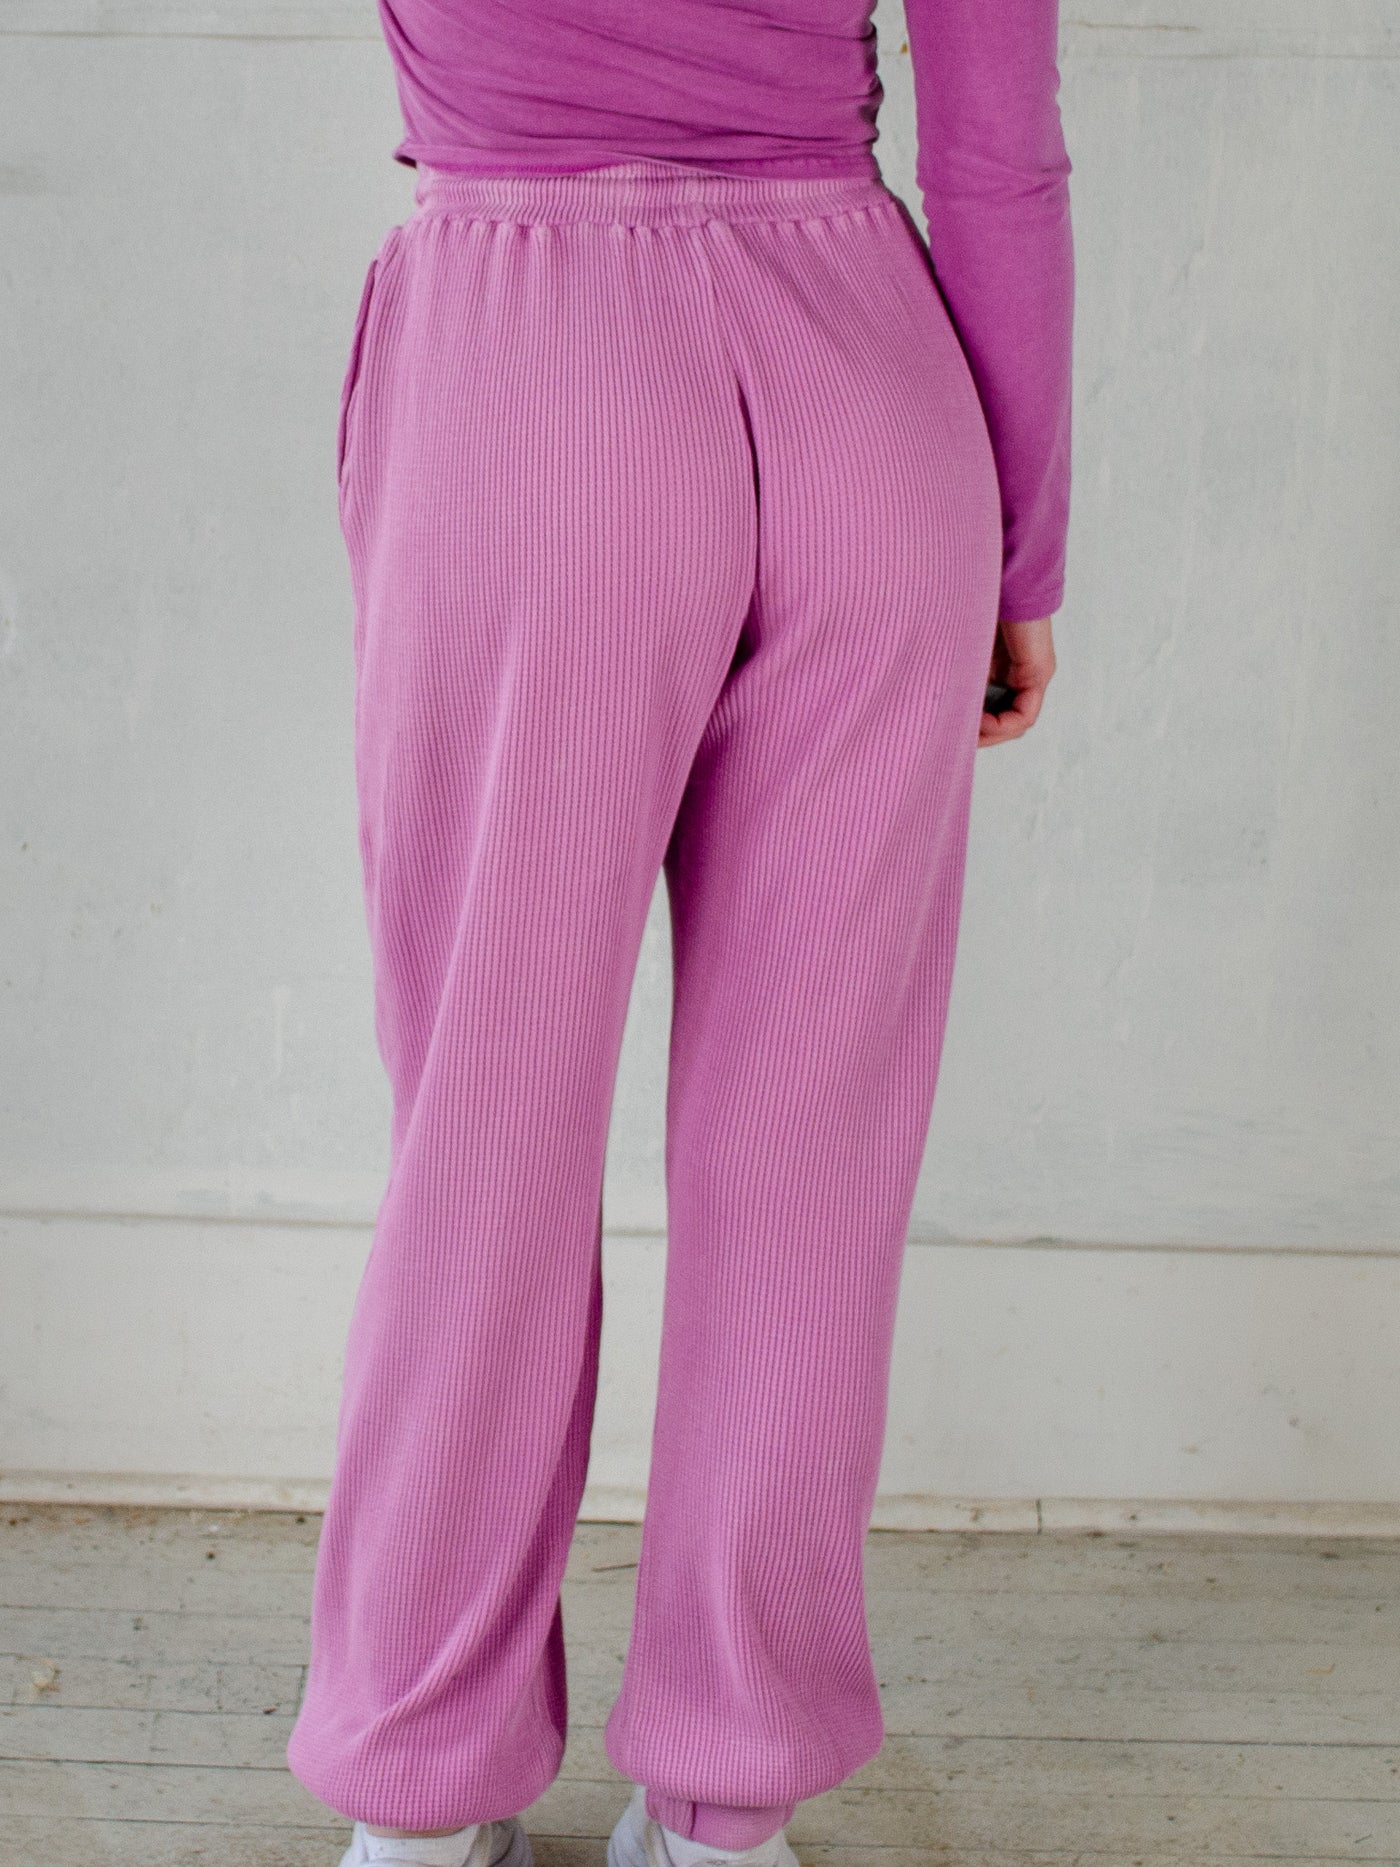 Model is wearing ribbed purple sweatpants with a purple cropped half zip.